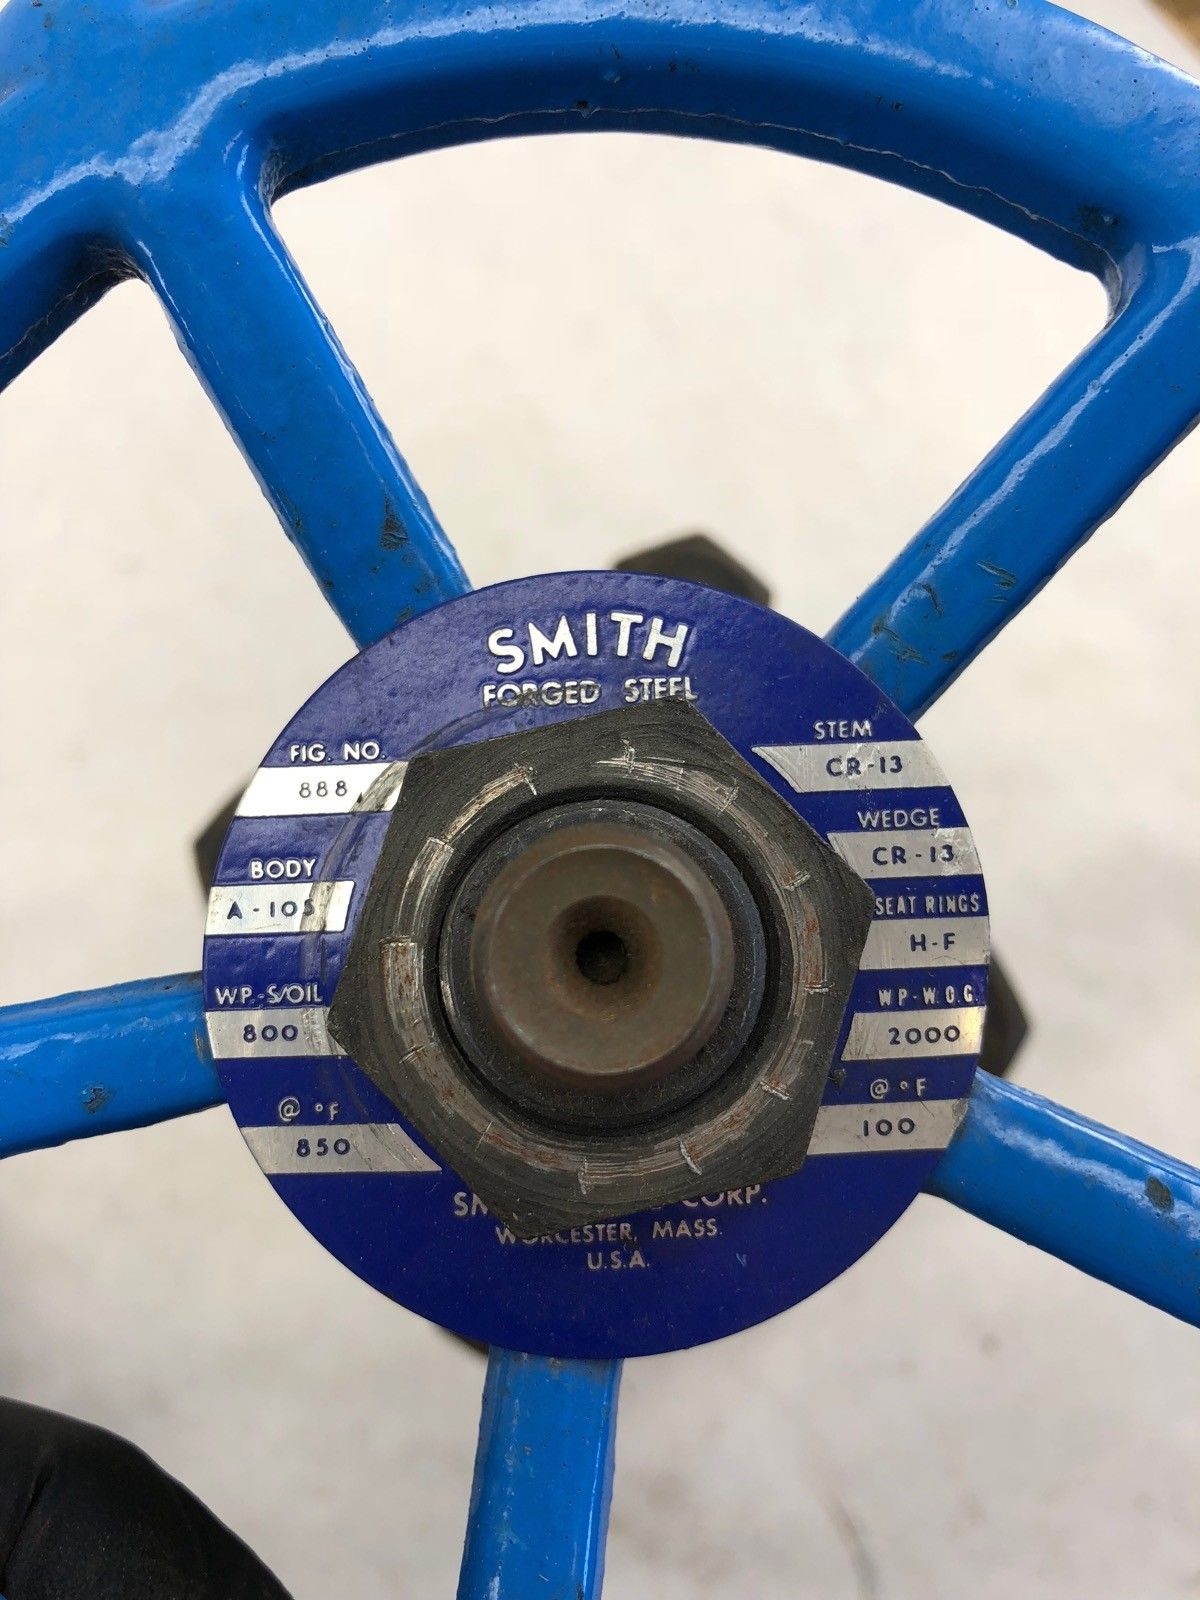 USED SMITH FORGED STEEL 1 1/2″ FIG #888 GATE VALVE A-105 300, FAST SHIP! 2